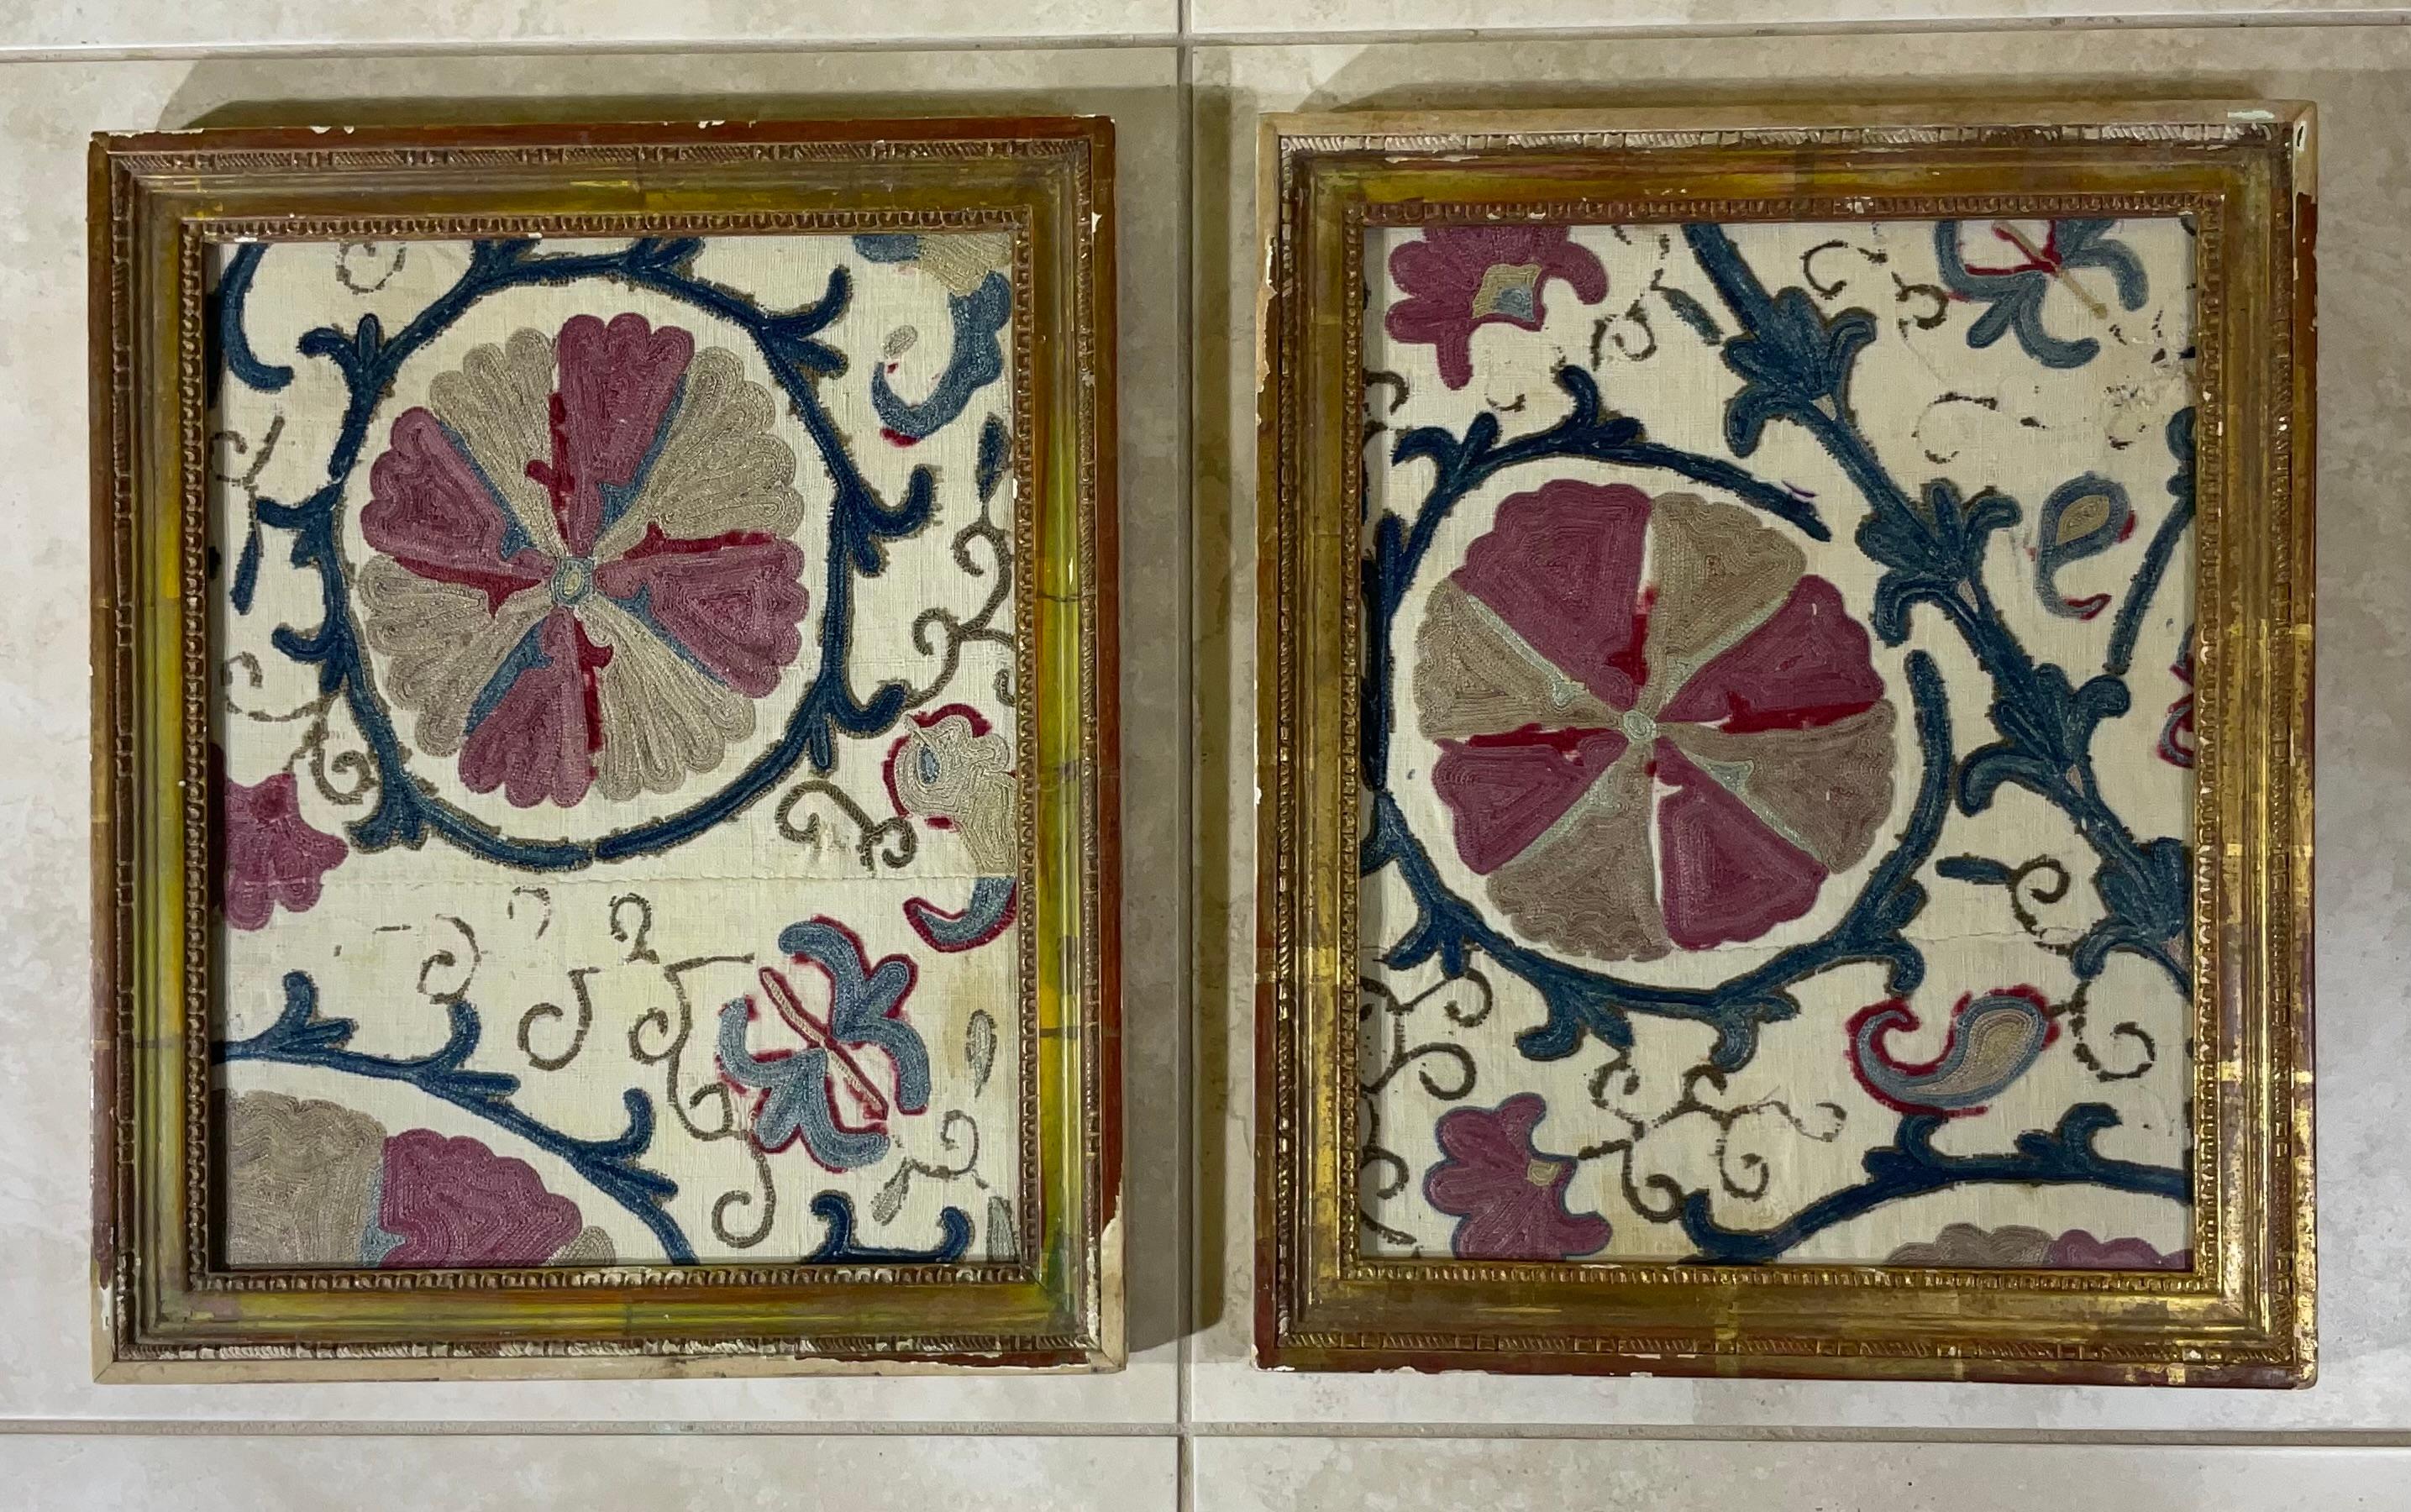 Exceptional antique hand embroidery fragments of Suzani textile, professionally mounted on pair of solid  wood antique Italian frames, to make beautiful versatile objects of art for wall hanging.
Even though these hand made fragments are almost